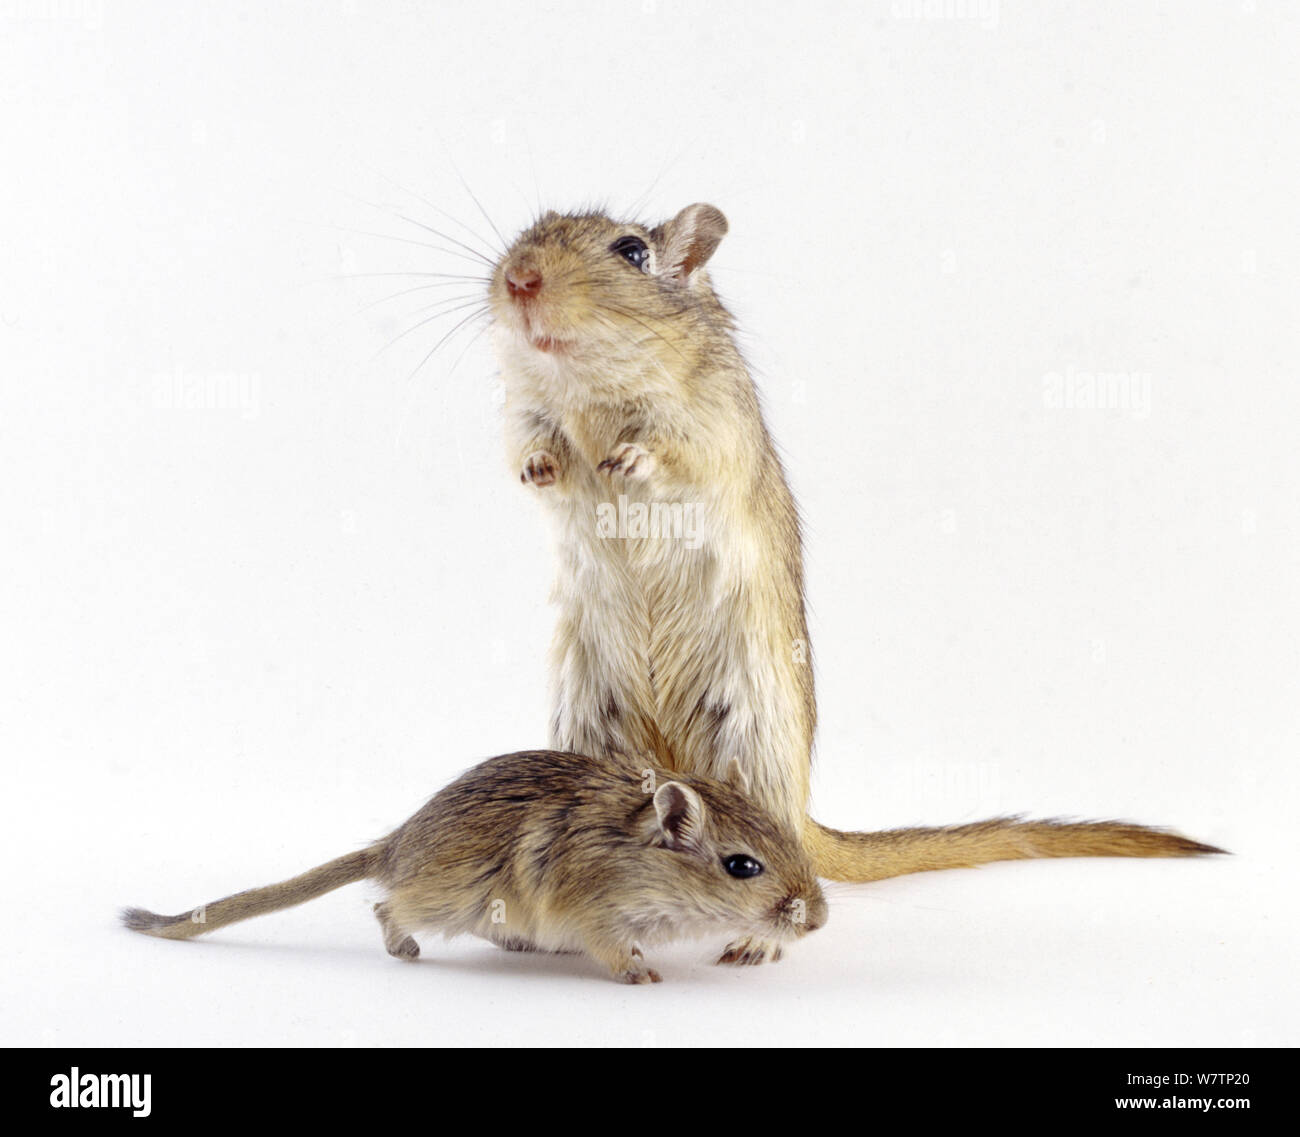 Agouti Mongolian Gerbil (Meriones unguiculatus) mother with baby, against white background Stock Photo